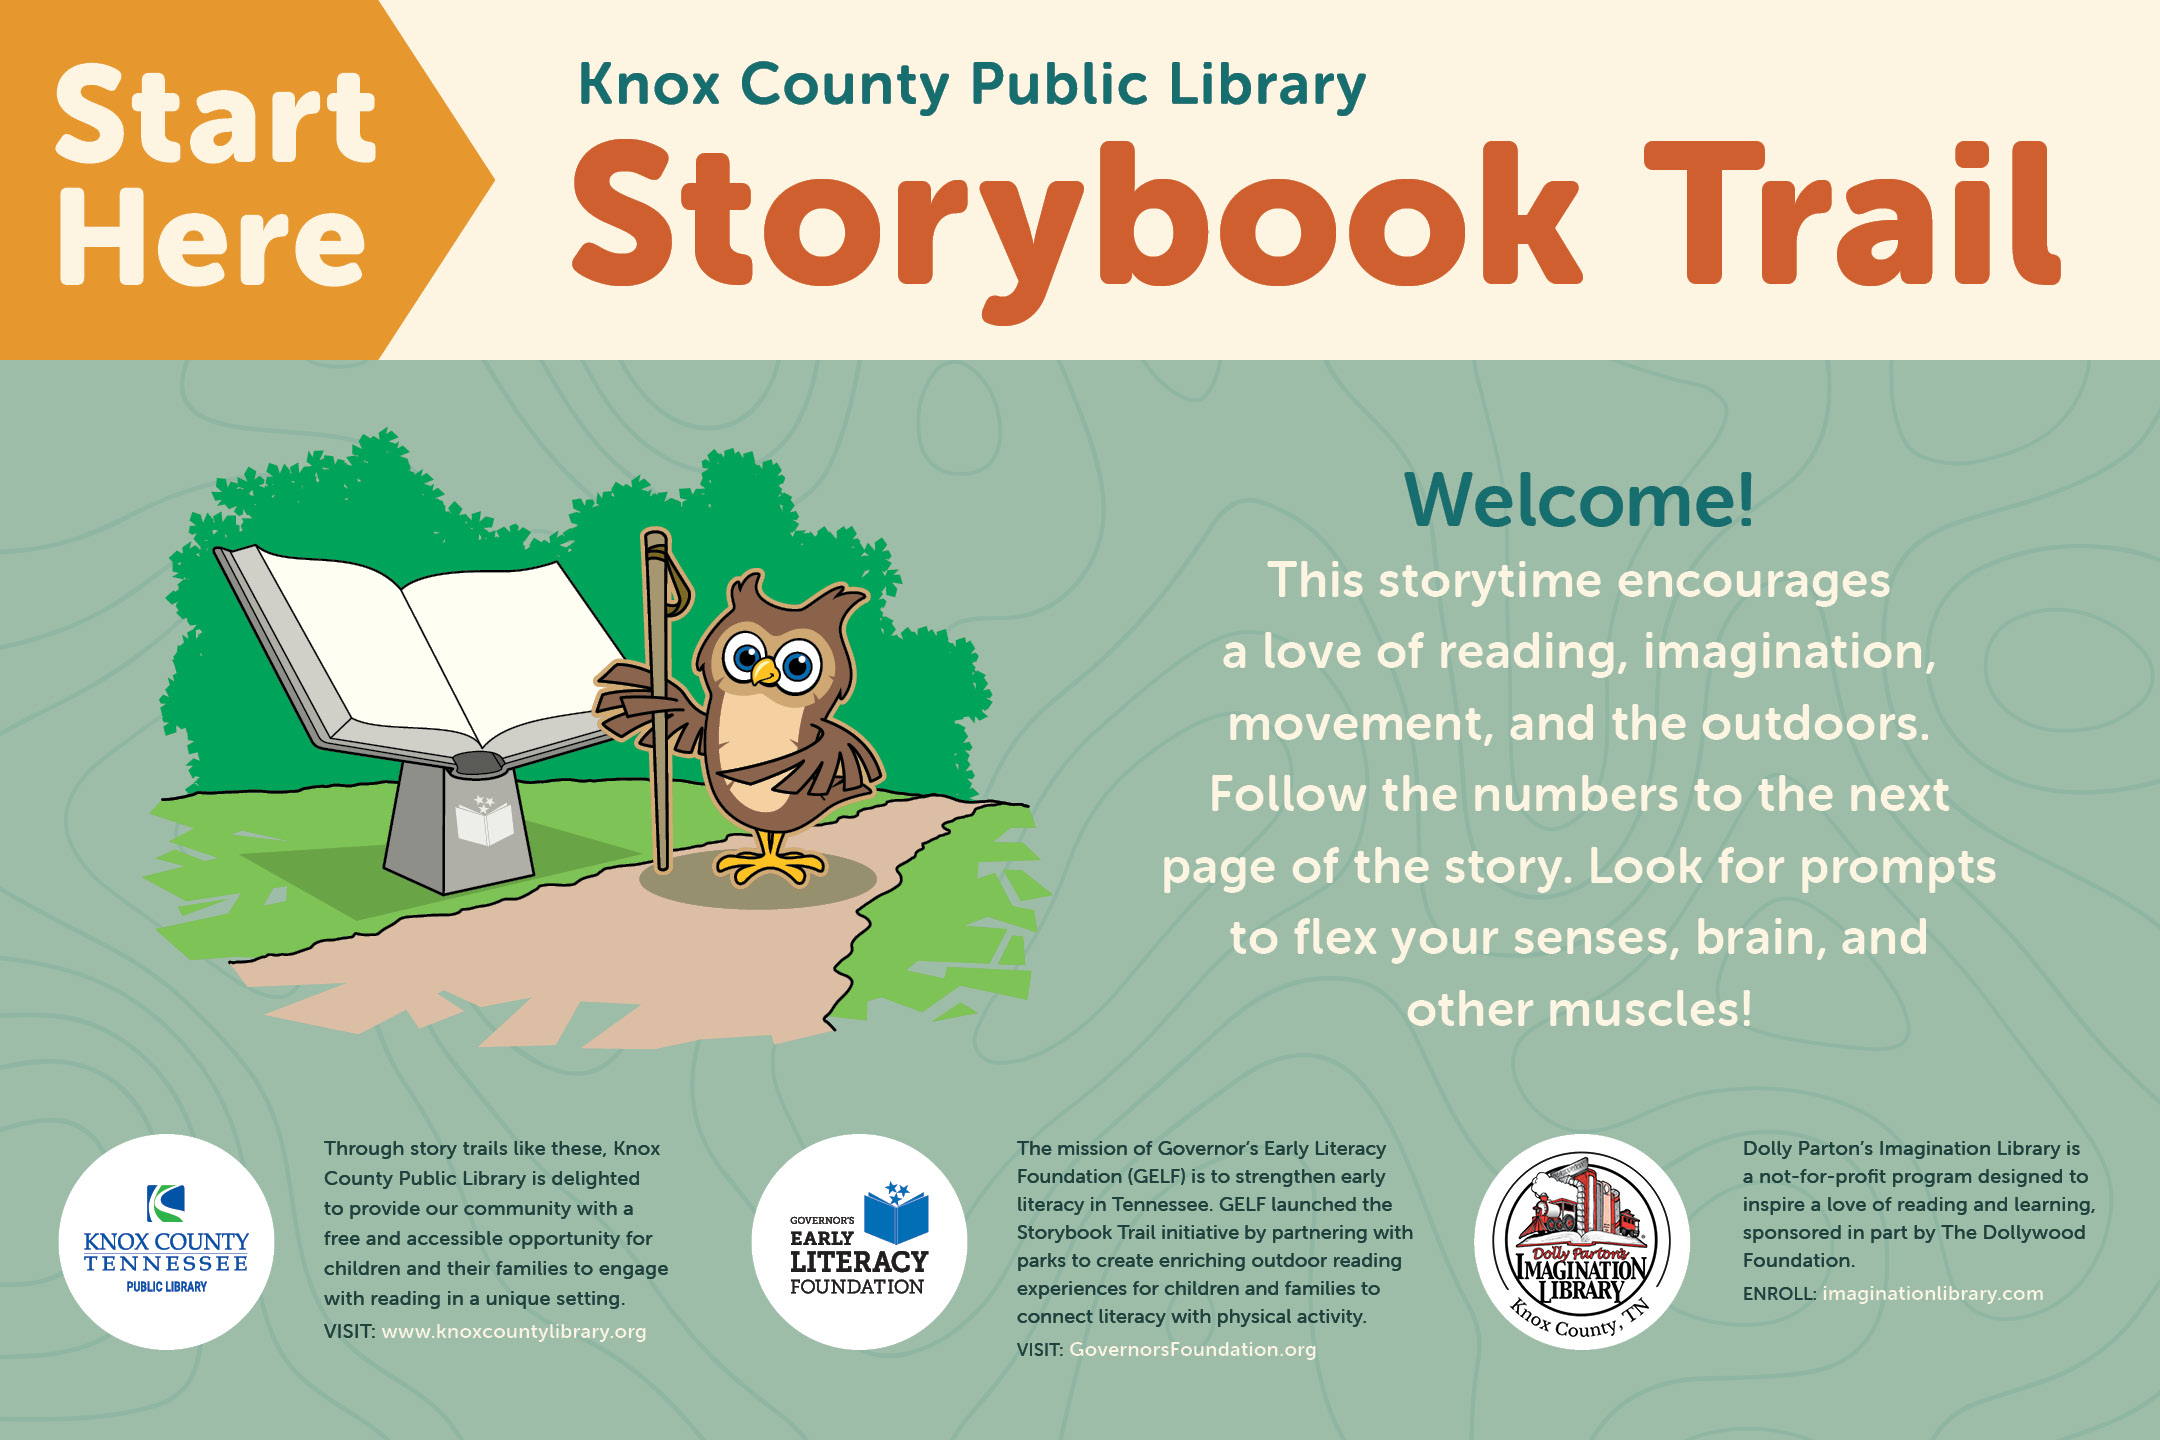 Sample of a Storybook Trail welcome panel, reading "Start here" and "Welcome!"